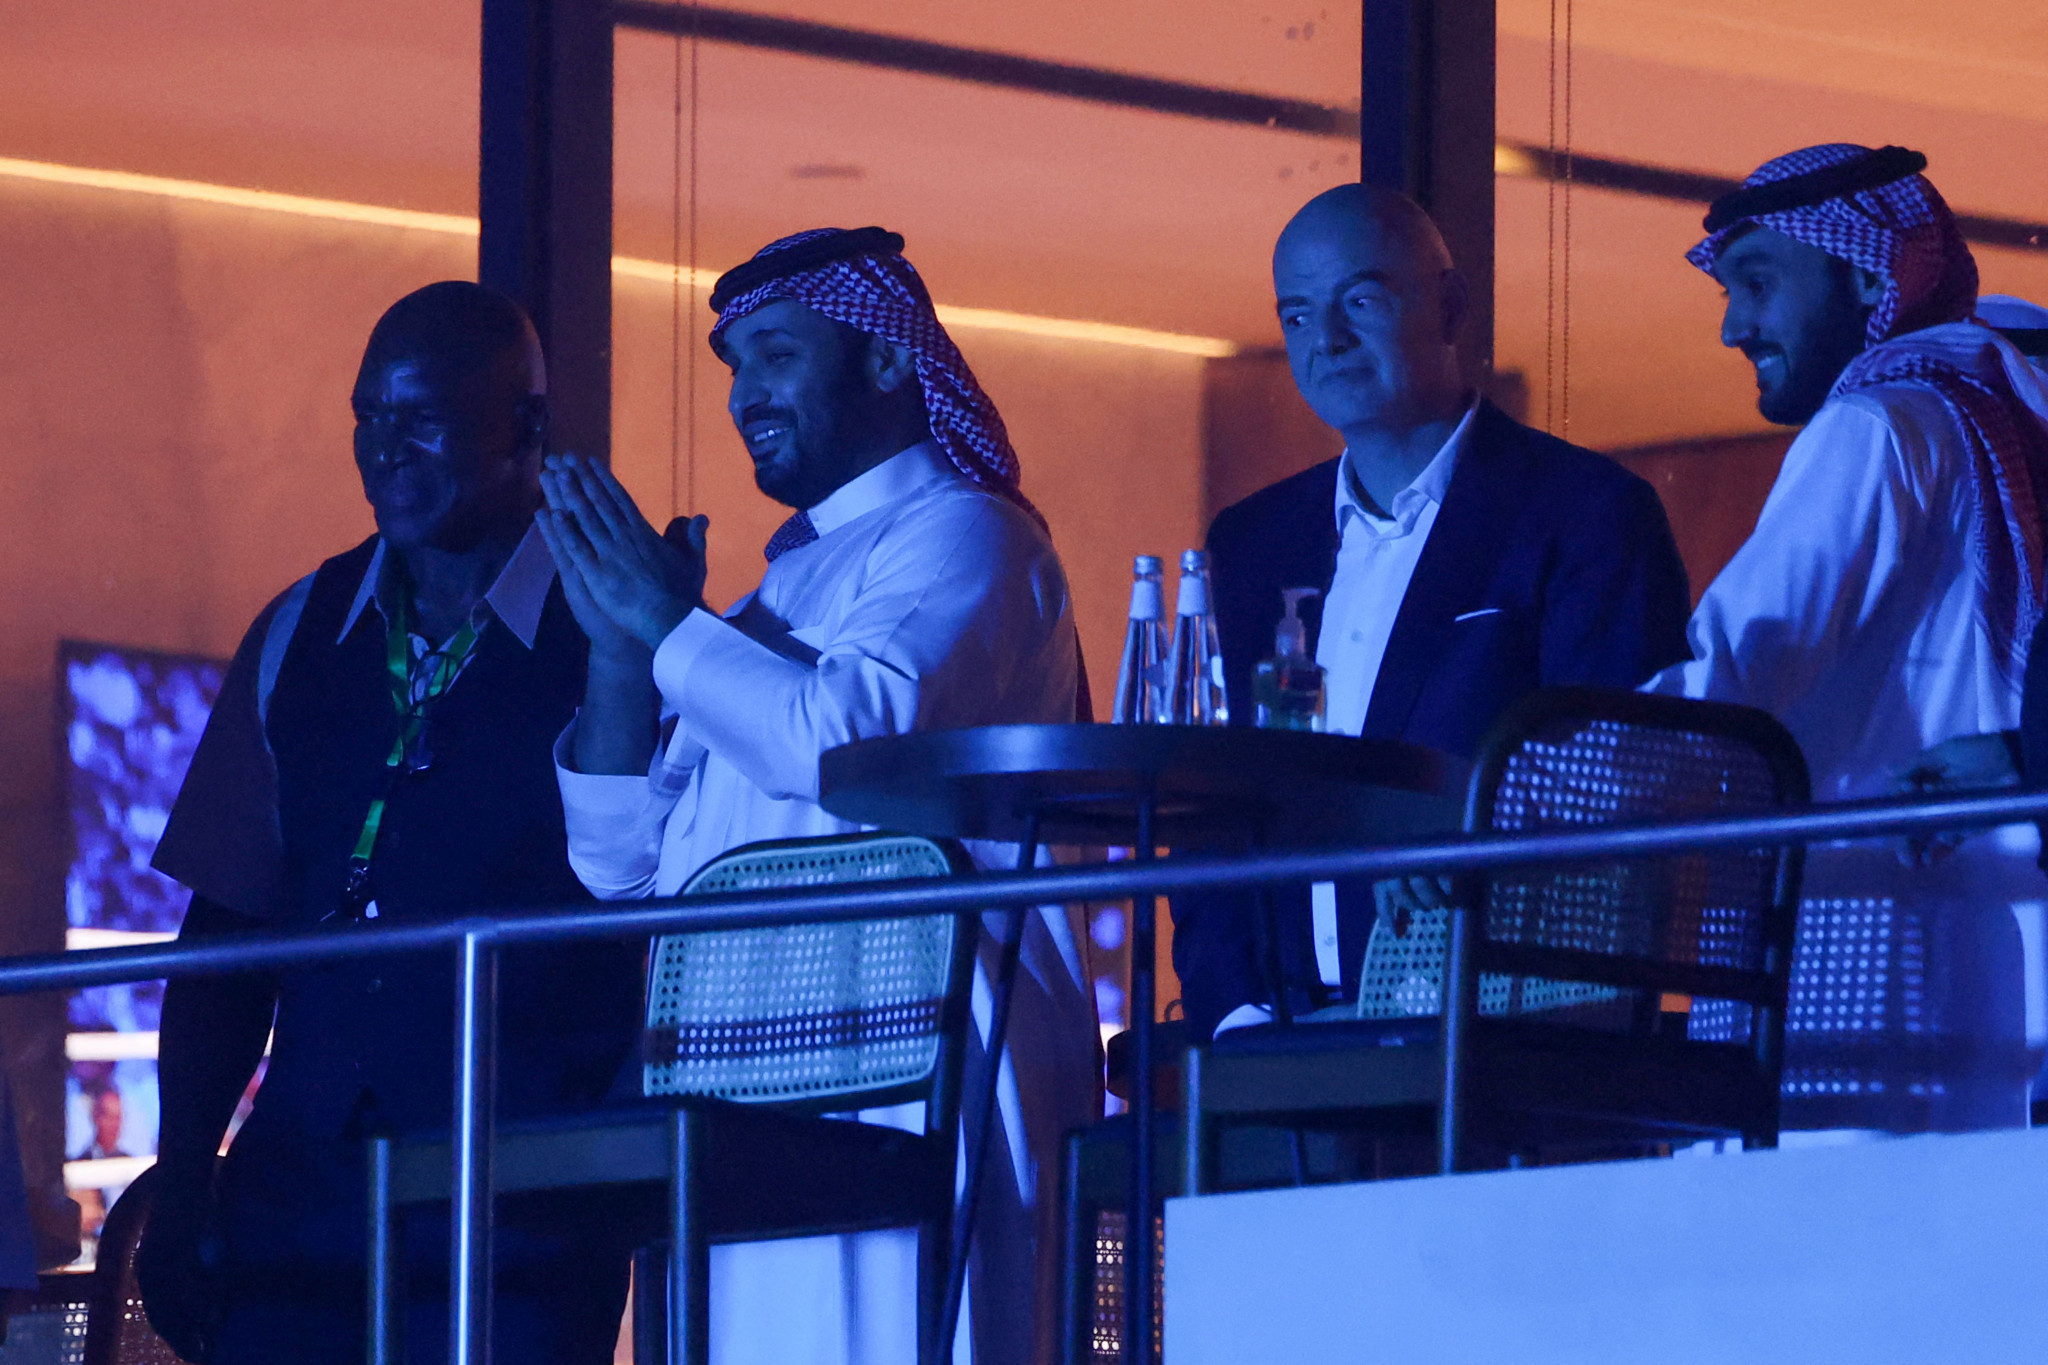 FIFA President Gianni Infantino, second right, appears to enjoy a friendly relationship with the Saudi Crown Prince Mohammed bin Salman, second left, having attended the opening match of the last two World Cups with him ©Getty Images